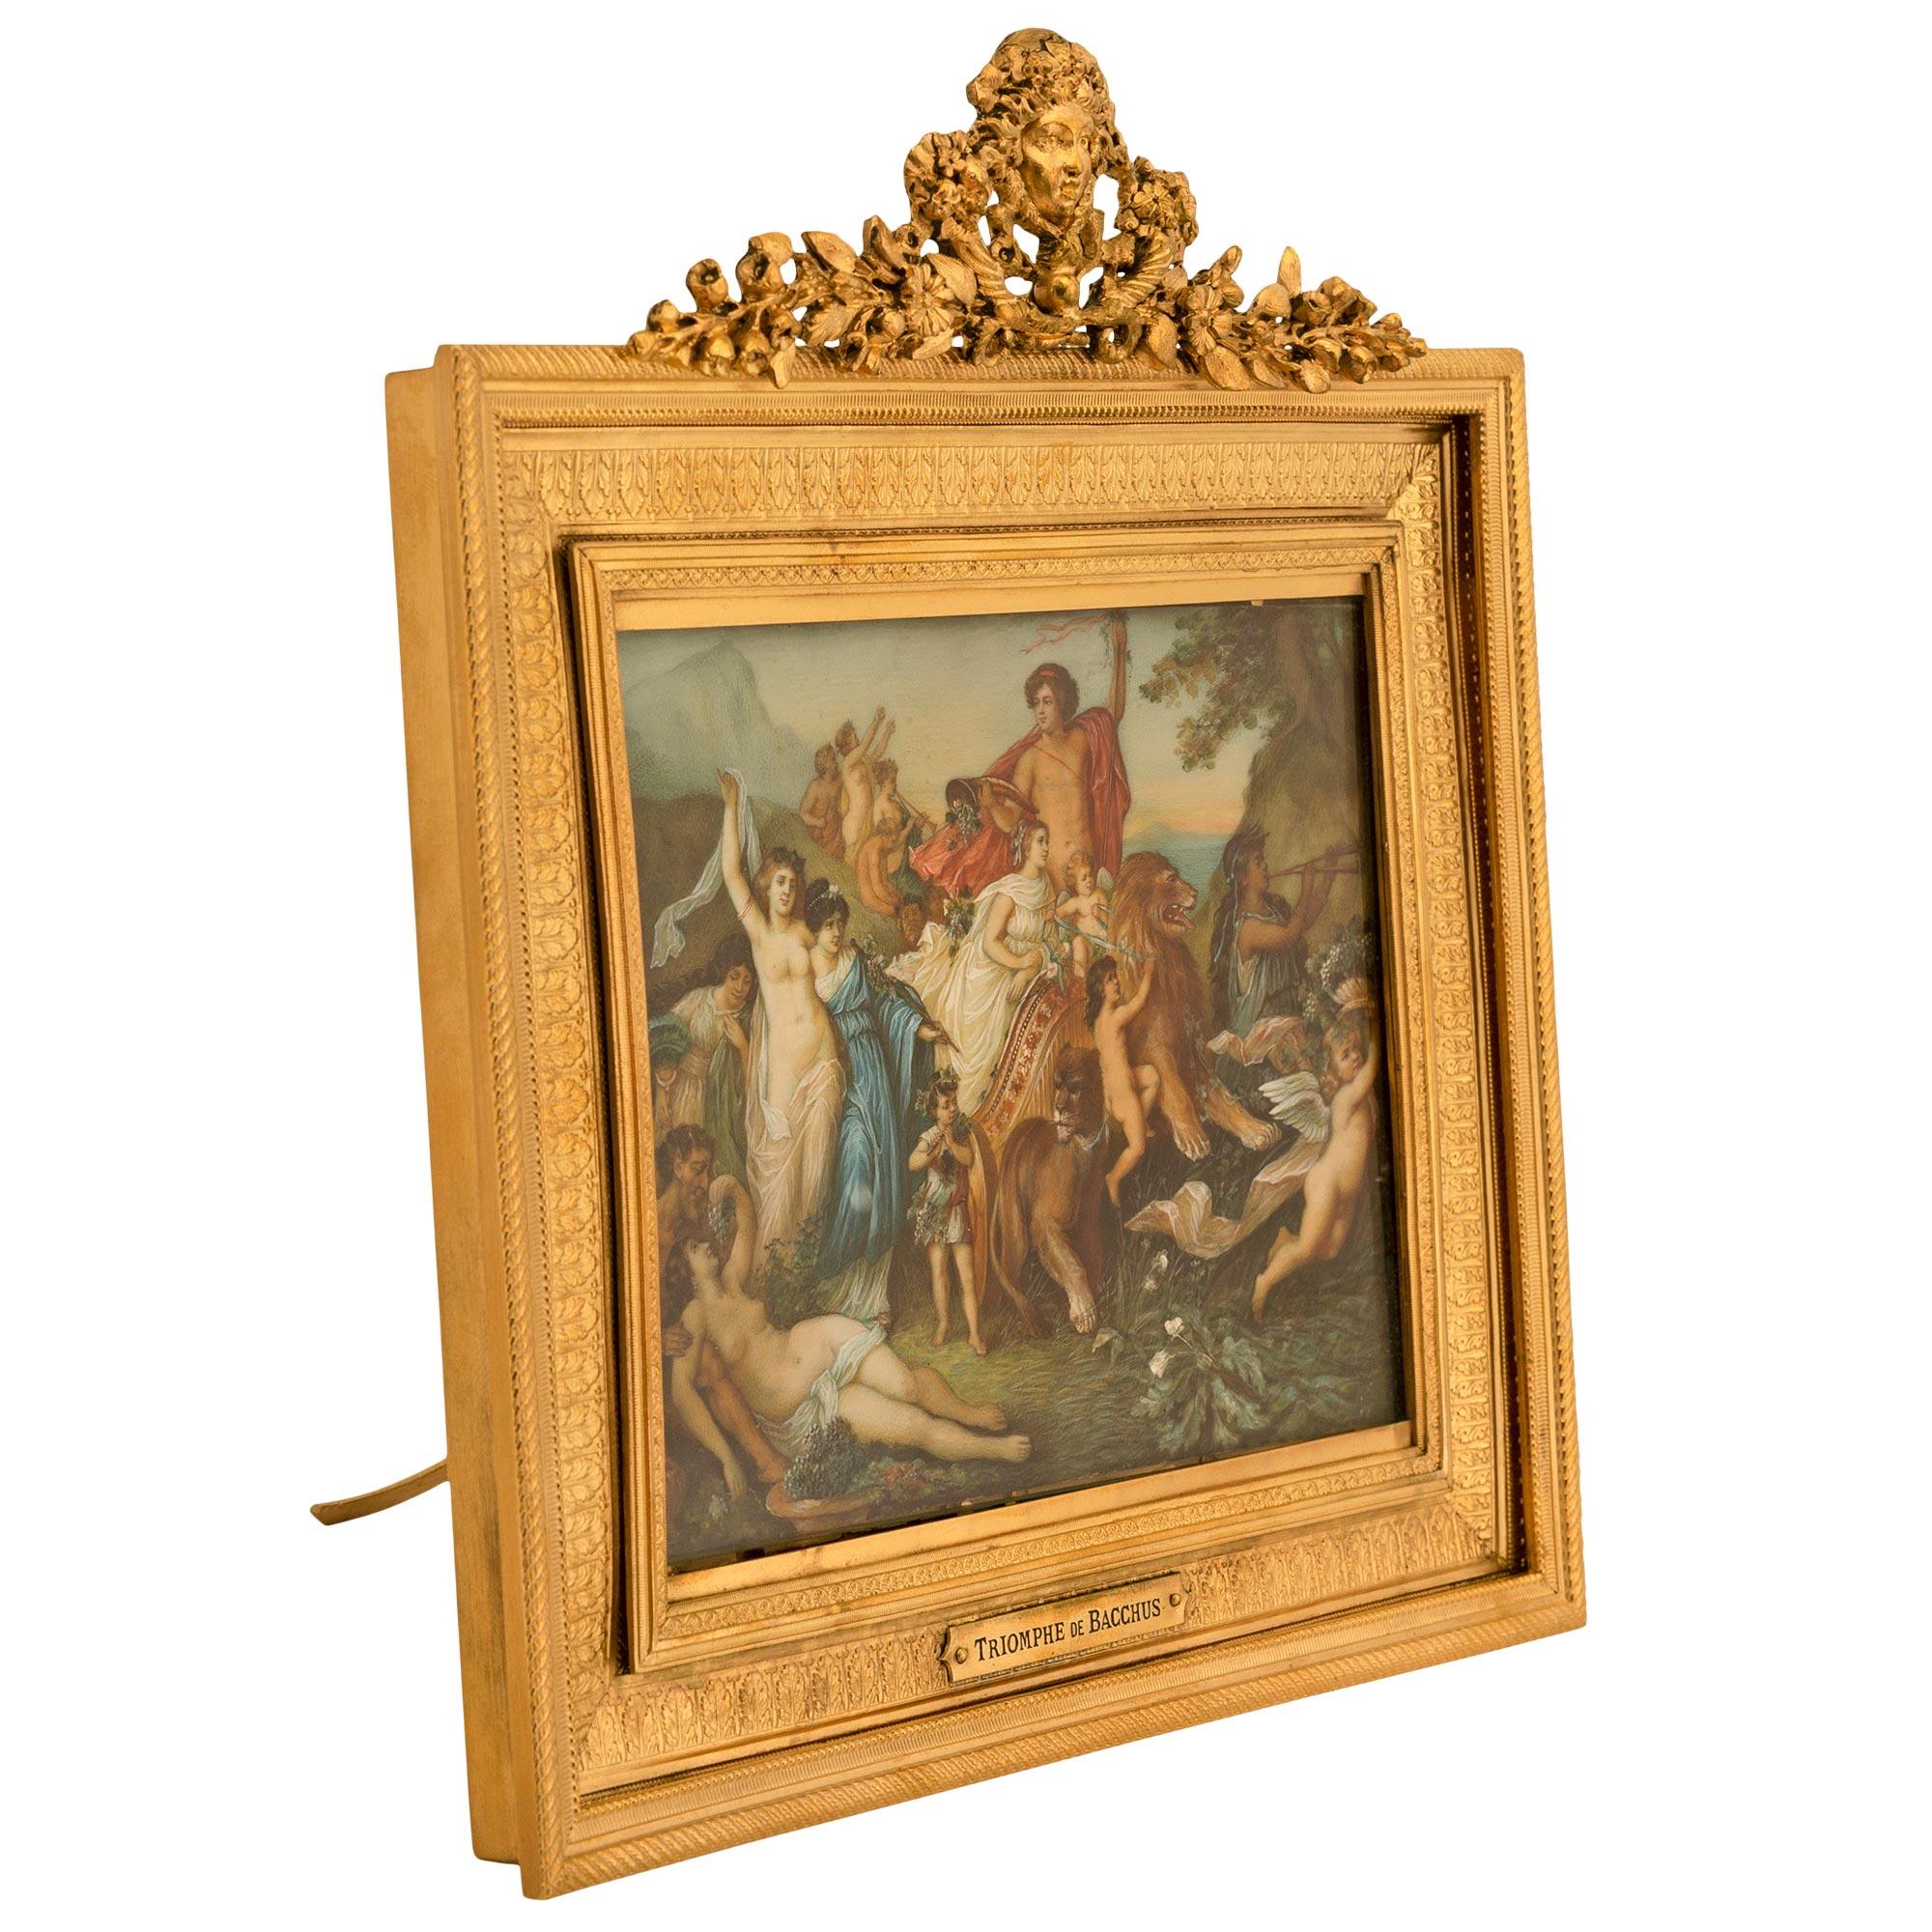 A beautiful small scale French 19th century Louis XVI st. watercolor painting in its original ormolu frame. The painting titled Triomphe de Bacchus (Triumph of Bacchus) depicts wonderfully executed personages celebrating with a beautiful maiden in a